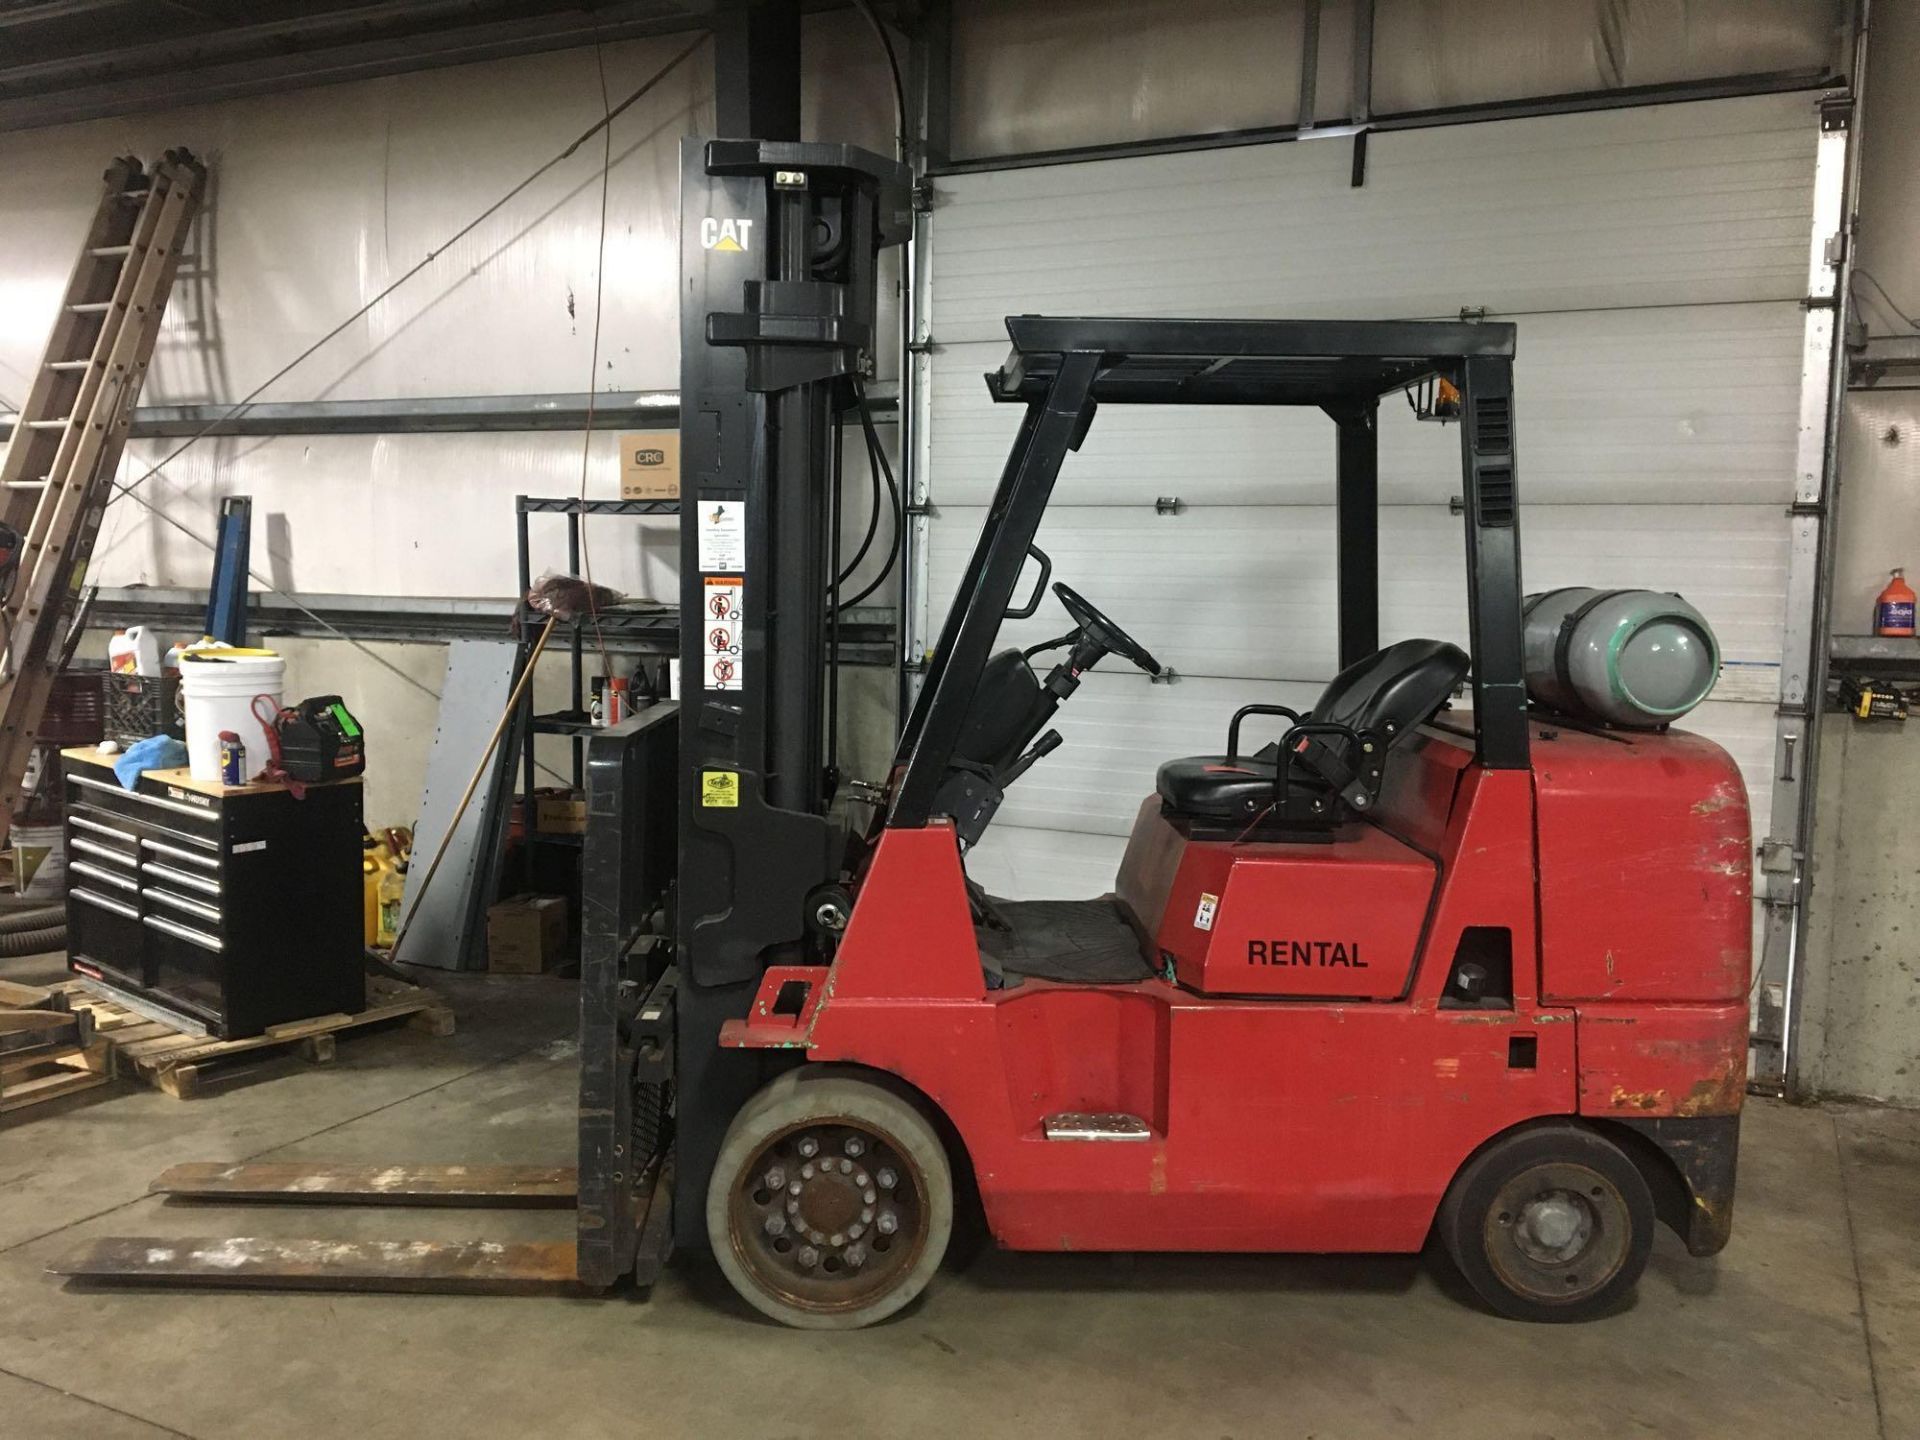 Propane Forklift, Mitsubishi, FGC40K, Max Ht 209", Max Cap 7100lbs, 11053 Hrs Started and Moved.